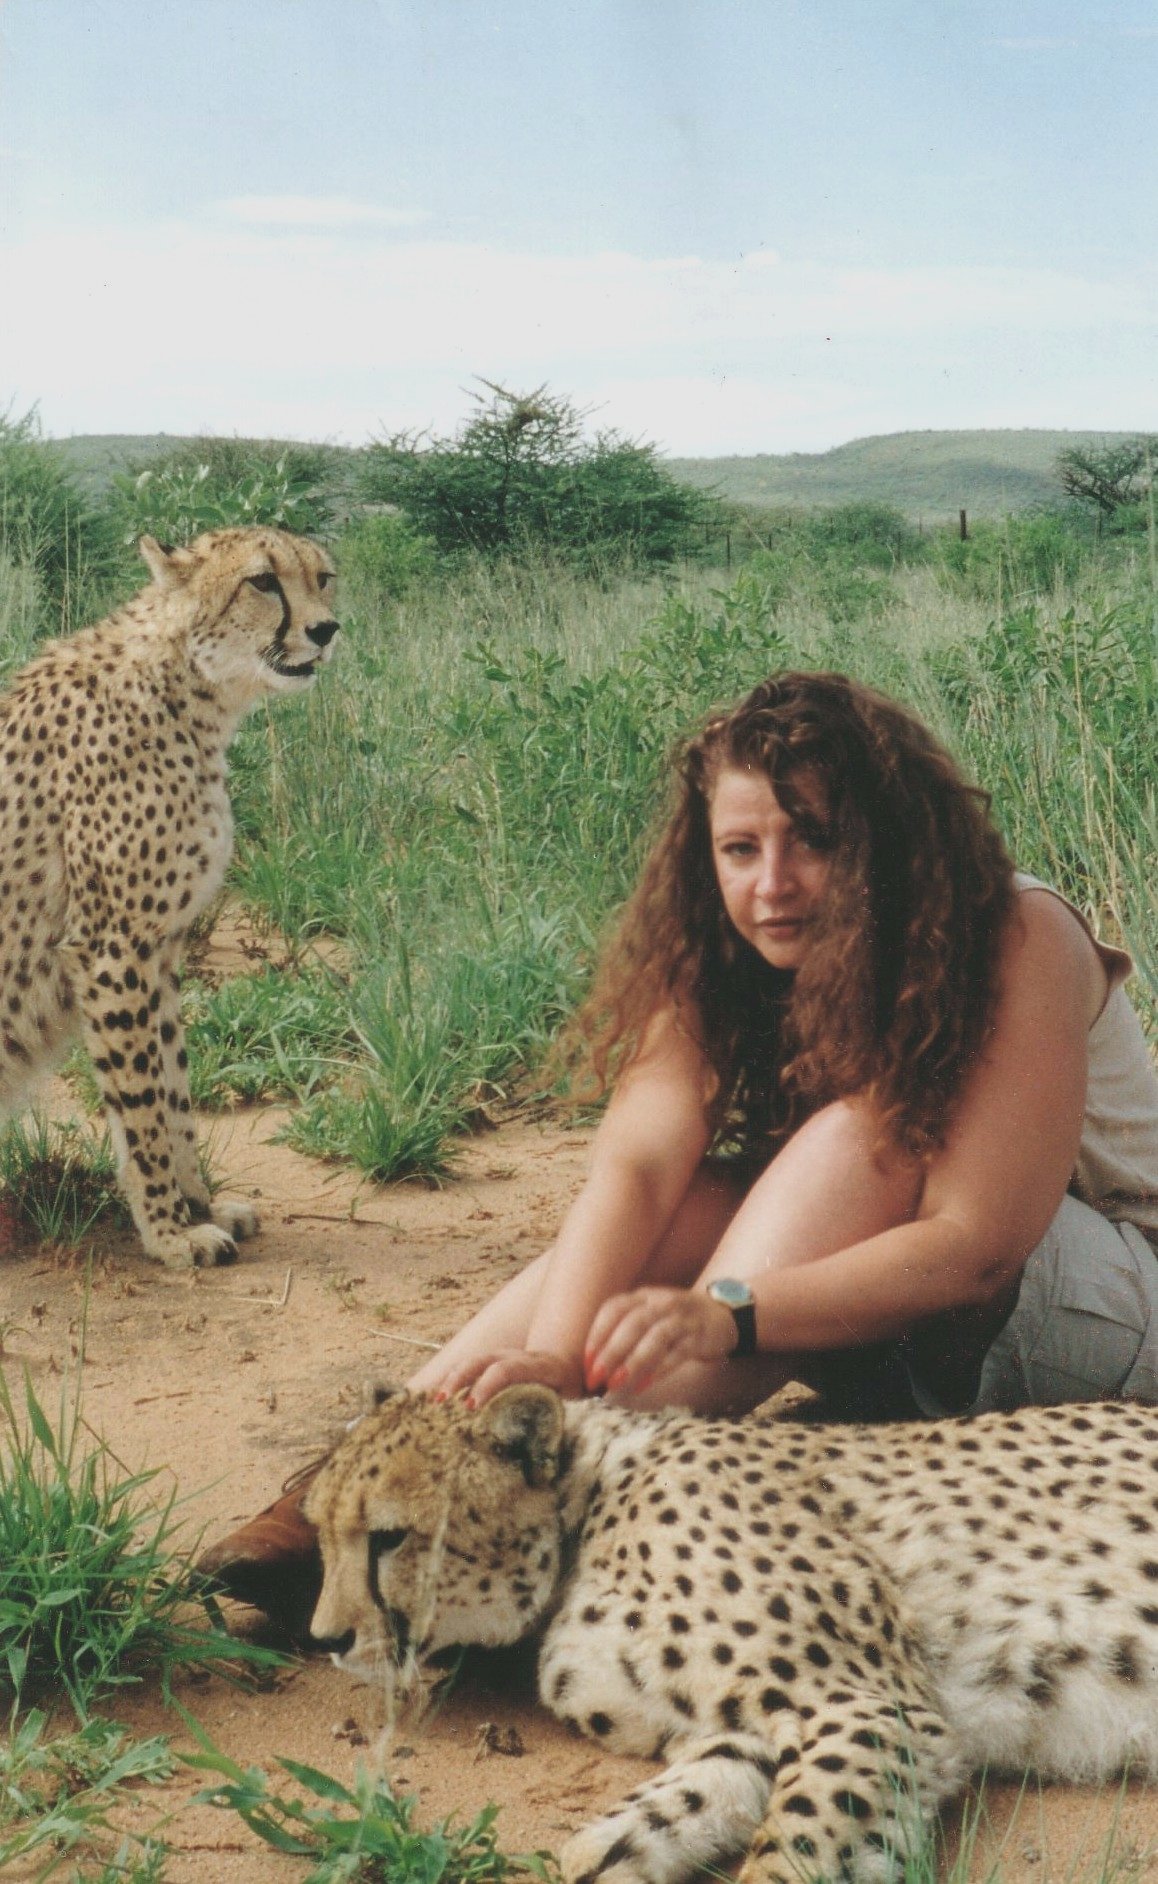 Lynn Santer with Cheetahs in The AfriCat Foundation, Namibia, Africa